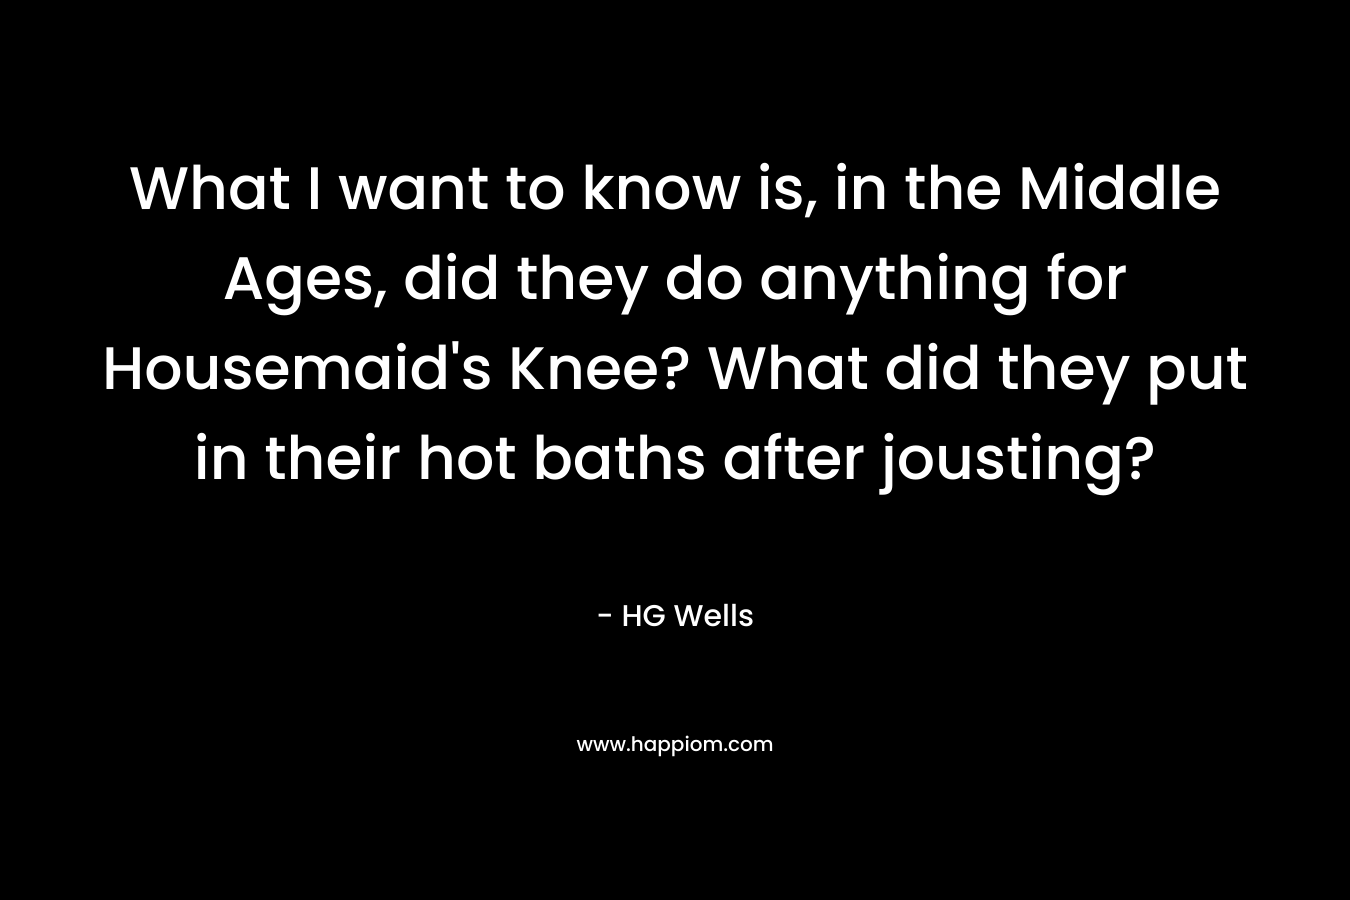 What I want to know is, in the Middle Ages, did they do anything for Housemaid's Knee? What did they put in their hot baths after jousting?